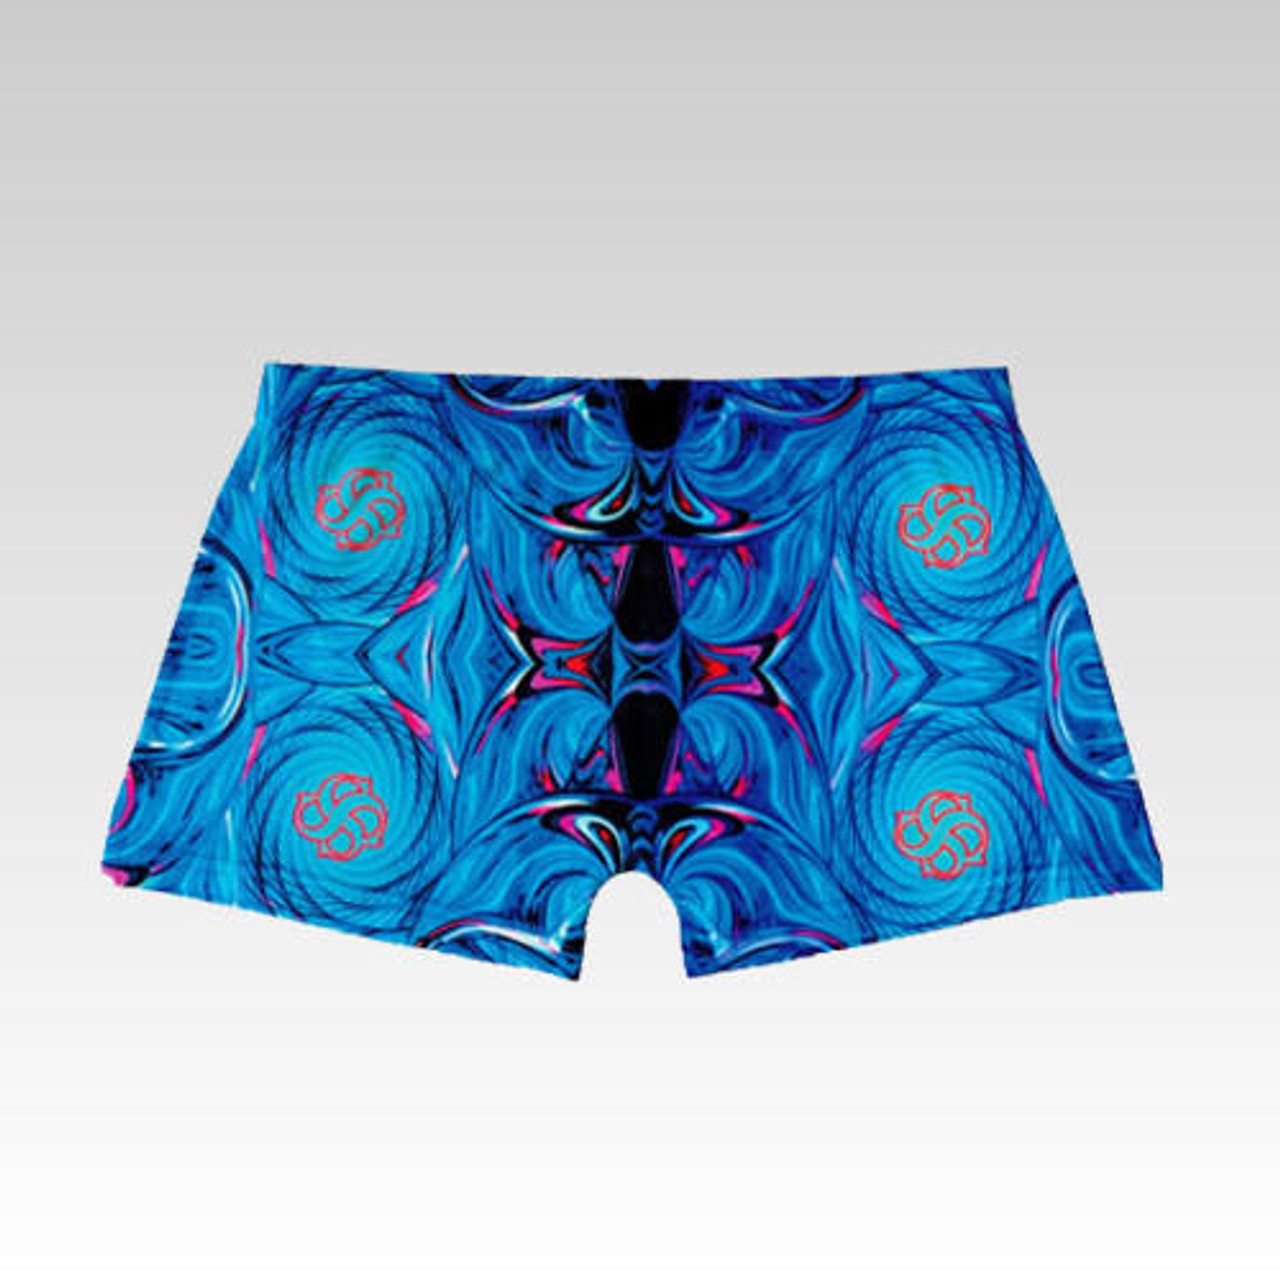 Custom Sublimated Boxers by Silky Socks